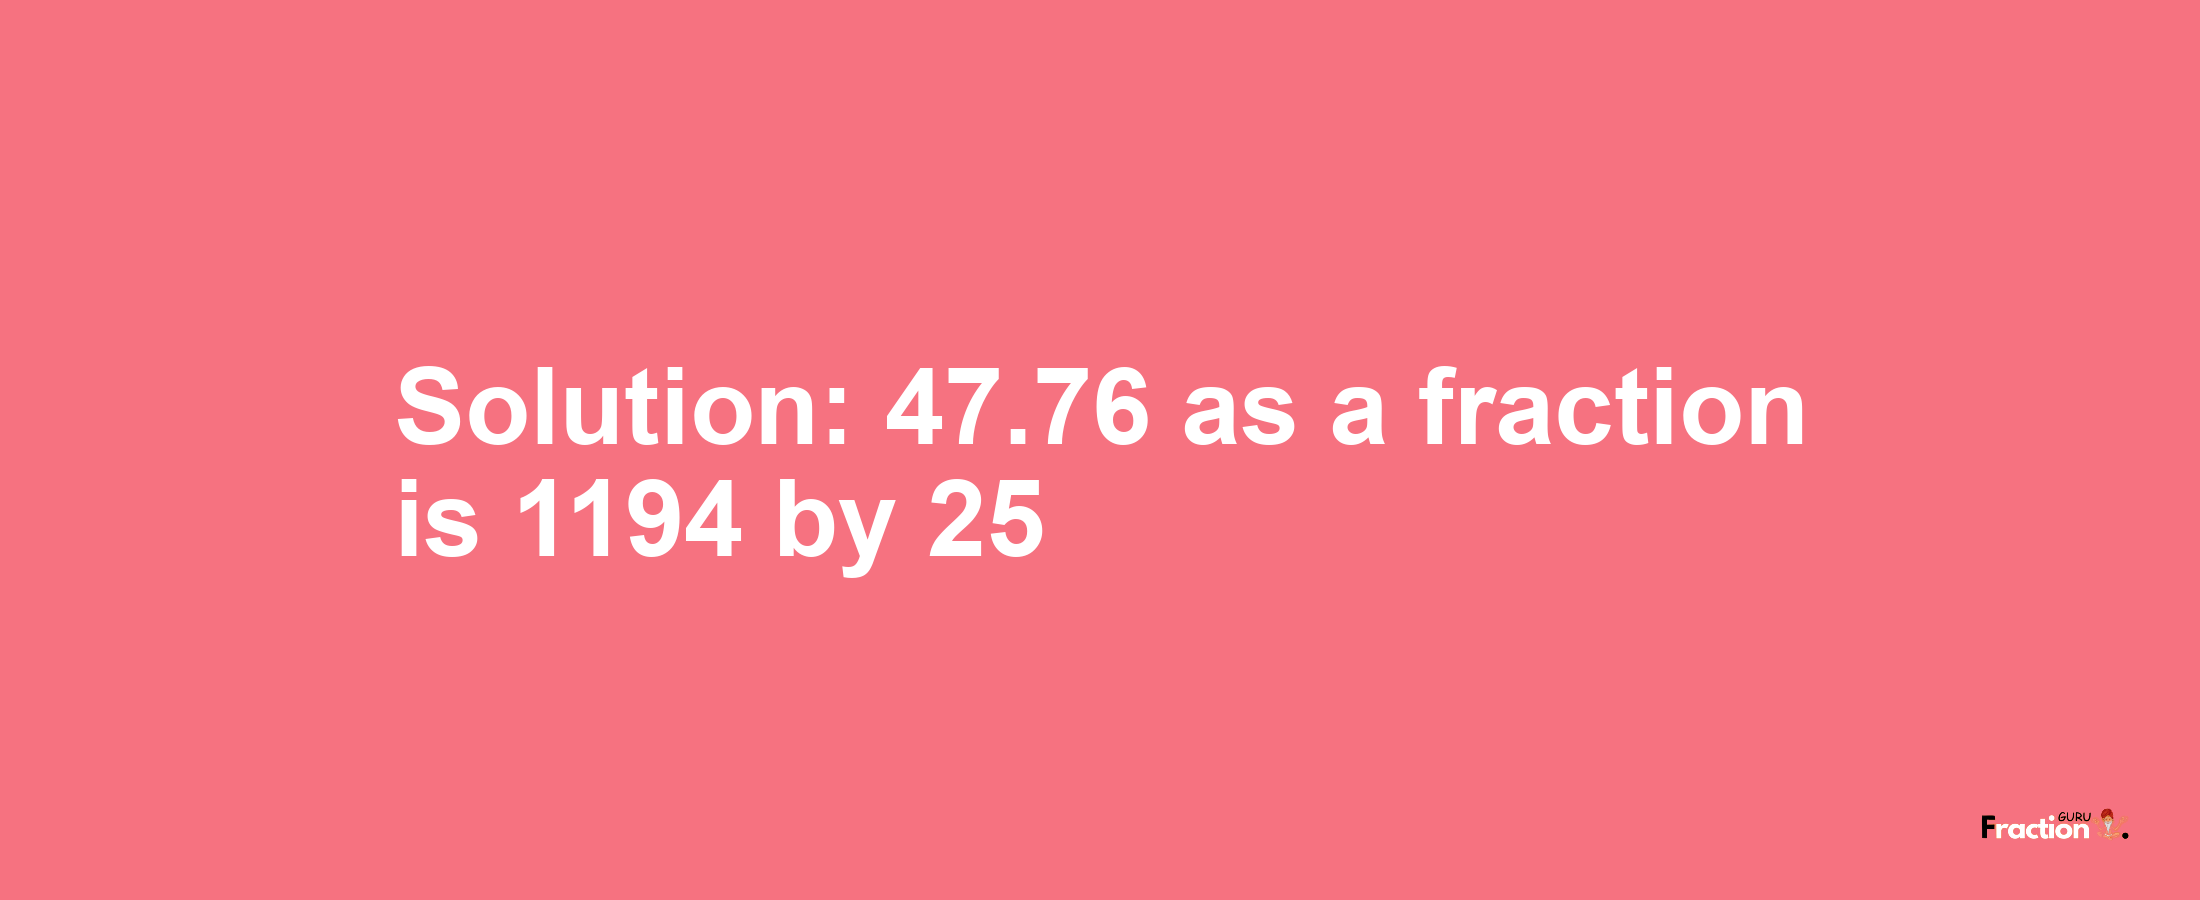 Solution:47.76 as a fraction is 1194/25